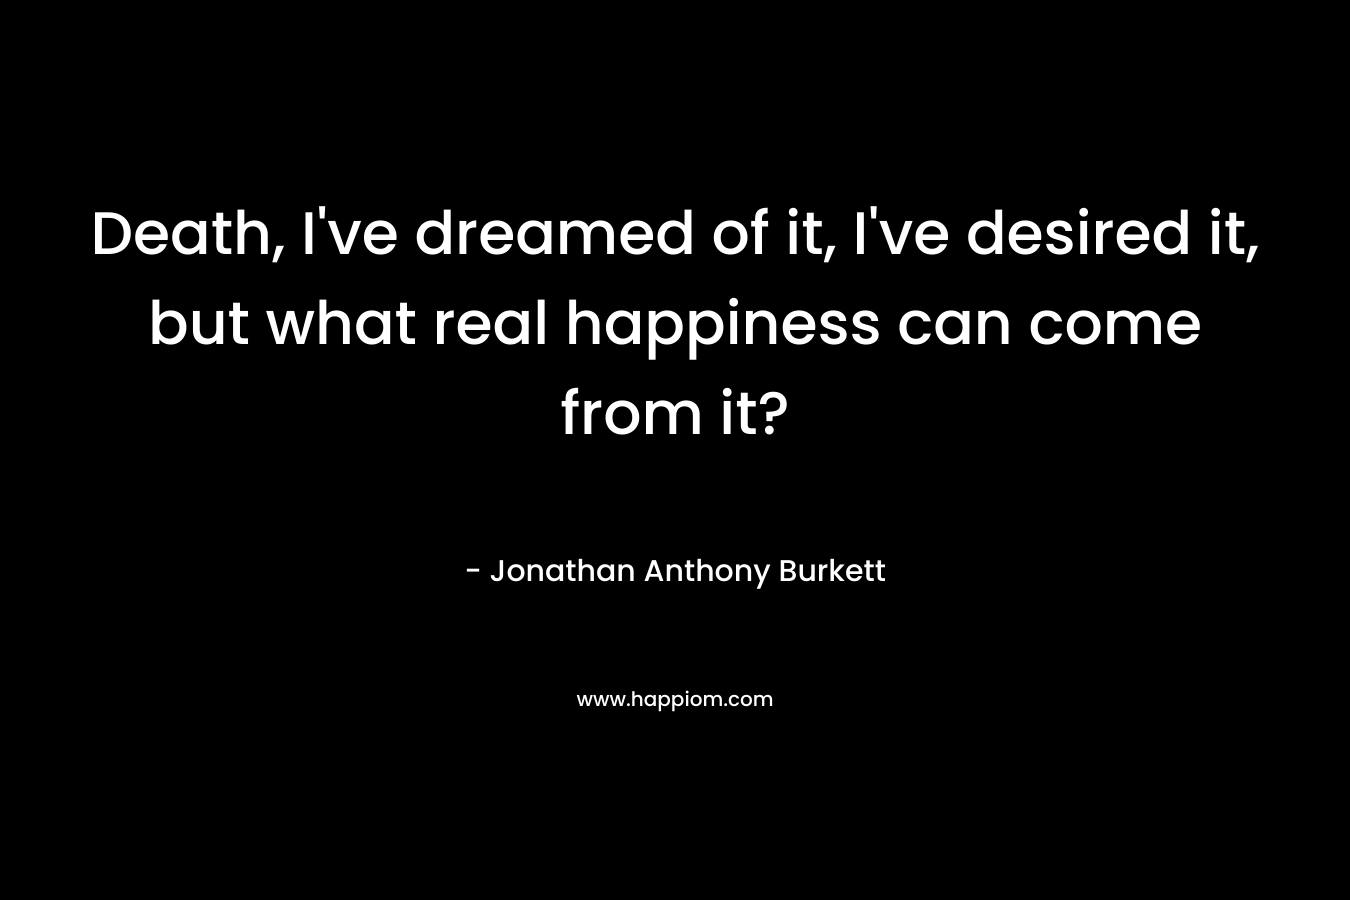 Death, I’ve dreamed of it, I’ve desired it, but what real happiness can come from it? – Jonathan Anthony Burkett